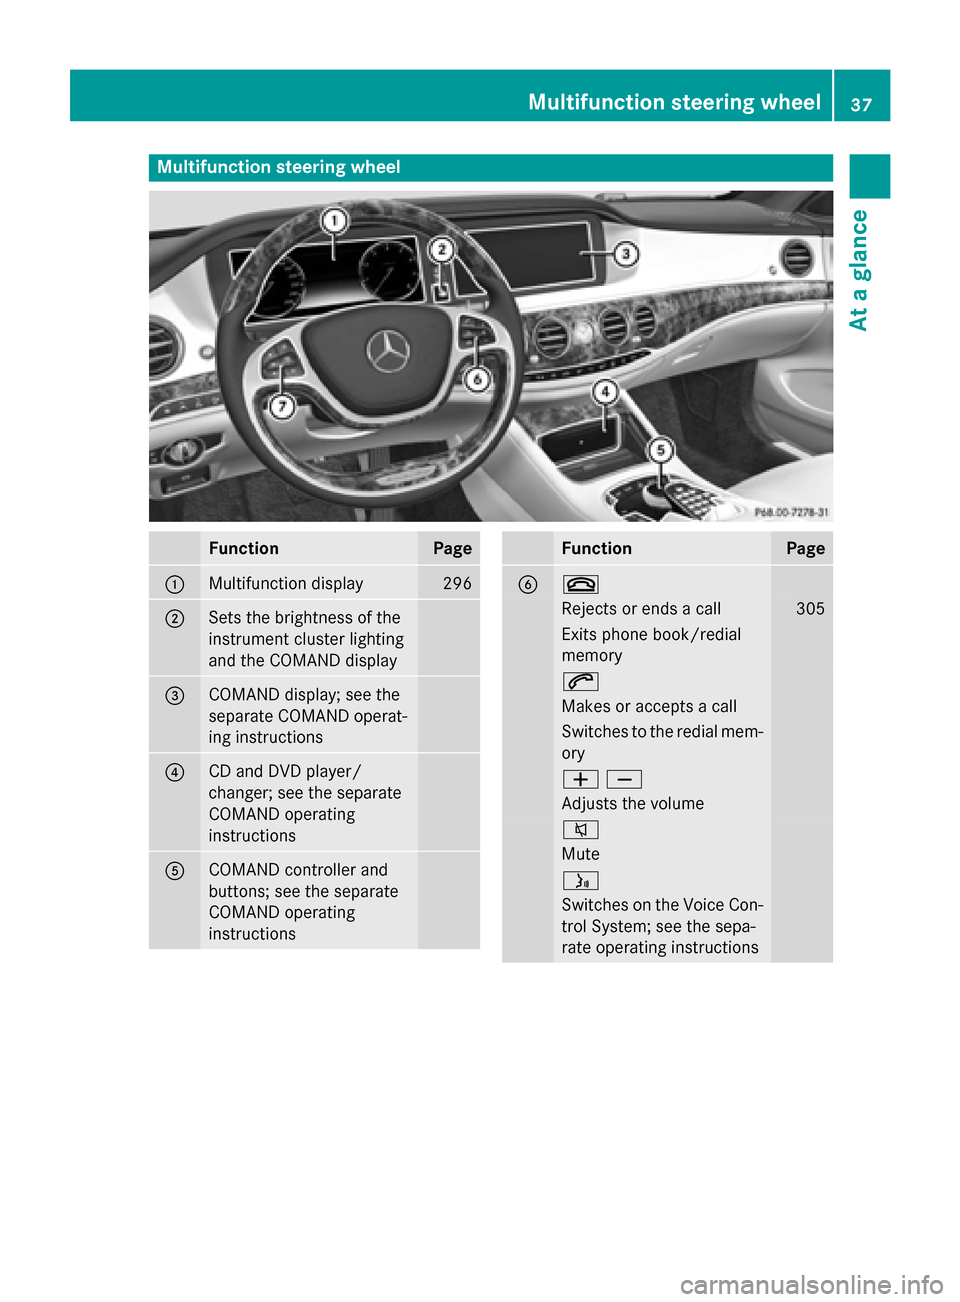 MERCEDES-BENZ S-Class 2015 W222 Owners Manual Multifunction steering wheel
Function Page
:
Multifunction display 296
;
Sets the brightness of the
instrument cluster lighting
and the COMAND display
=
COMAND display; see the
separate COMAND operat-